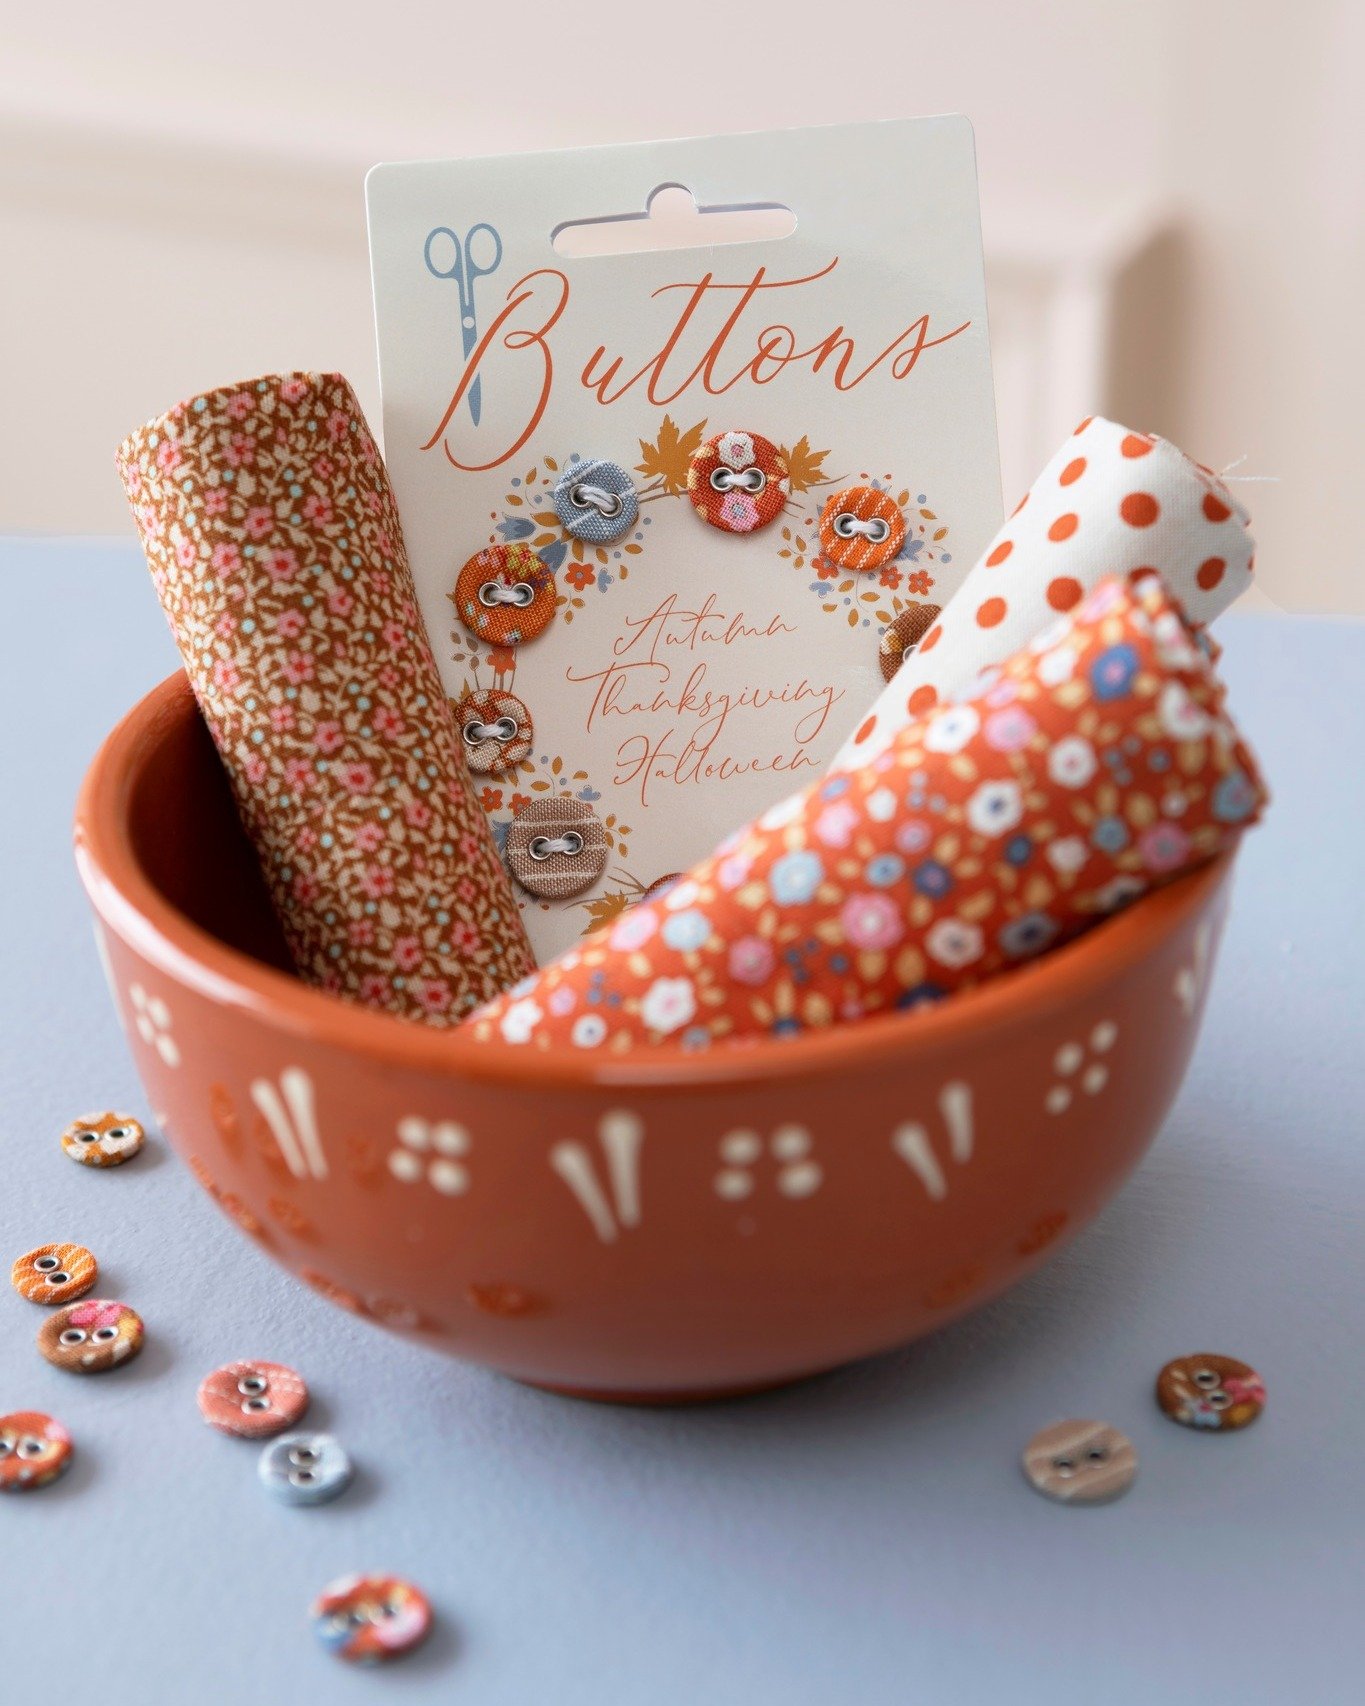 The adorable buttons in the Autumn collection of Creating Memories are the perfect finishing touch for any project! We can't wait to see you get creative with Creating Memories in mid-June!

#tilda #tildausa #ilovetilda #sewing #quilting #fabric #cre